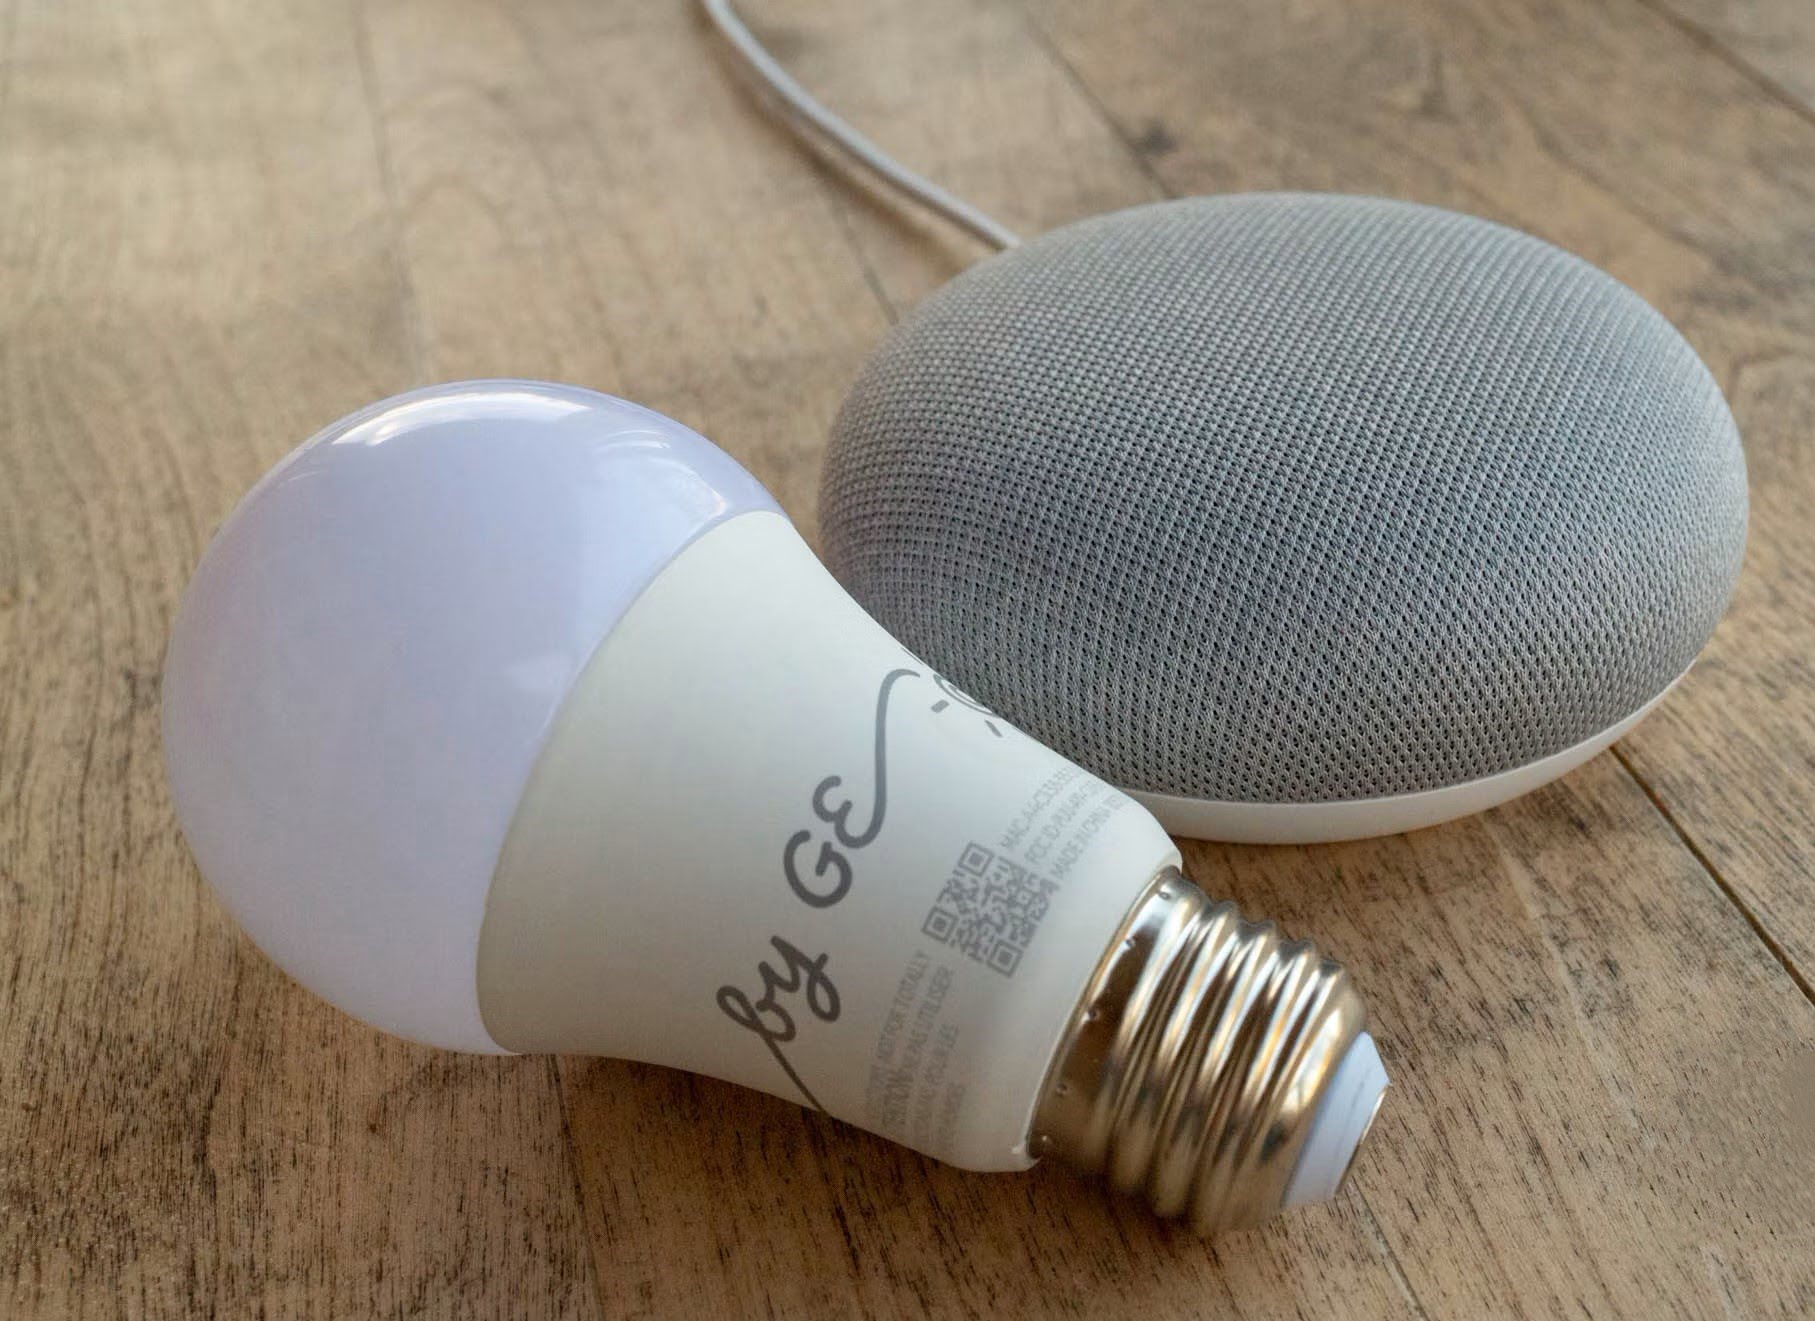 How To Set Up Lights With Google Home